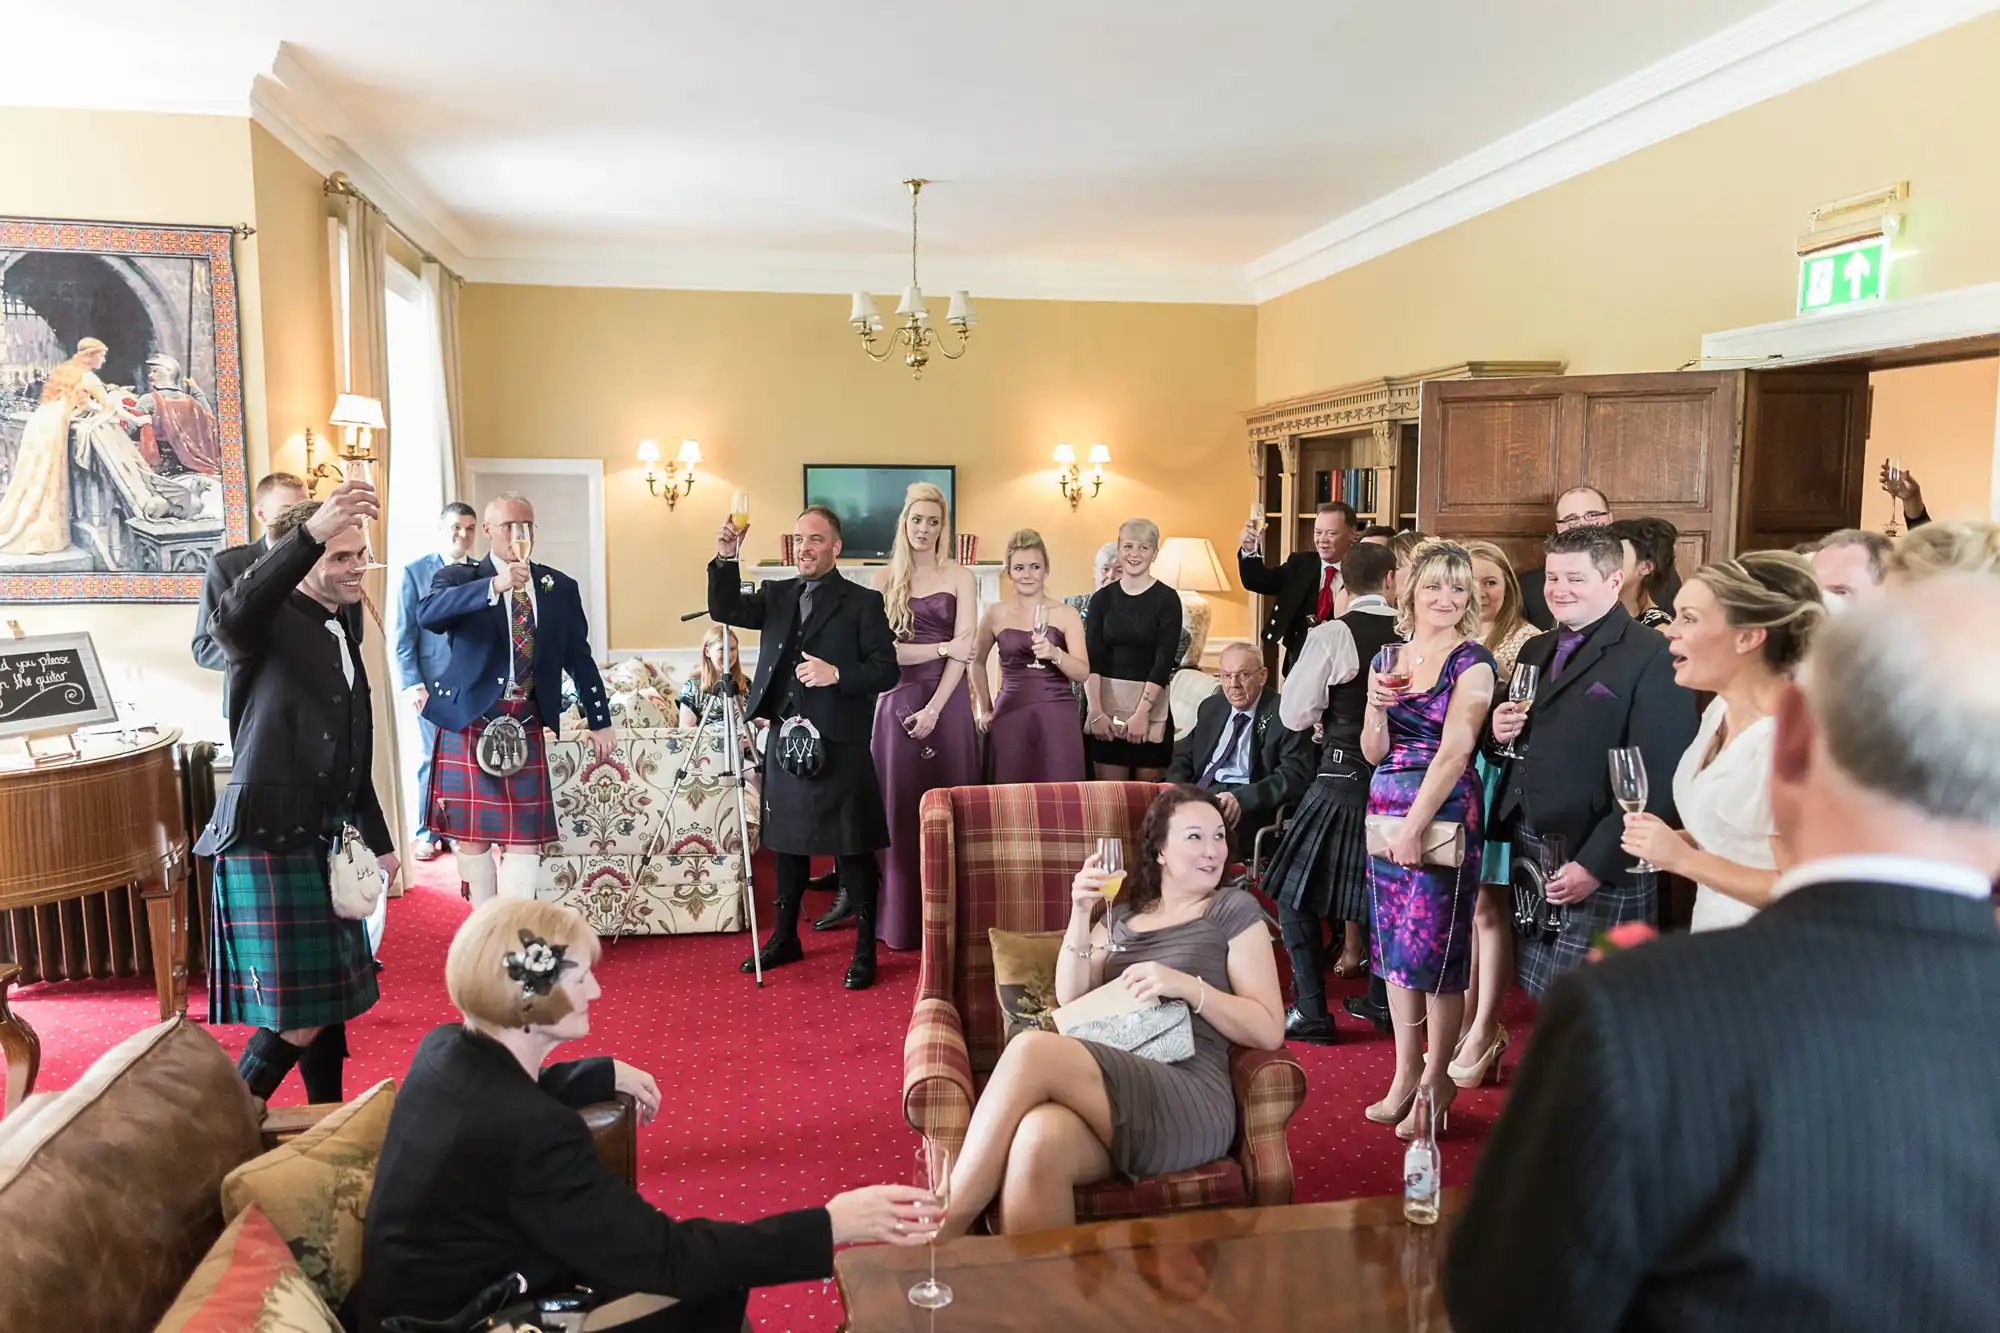 A group of elegantly dressed people holding drinks and enjoying a lively gathering in an opulent room, some standing, one sitting on a couch, with a few wearing traditional kilts.